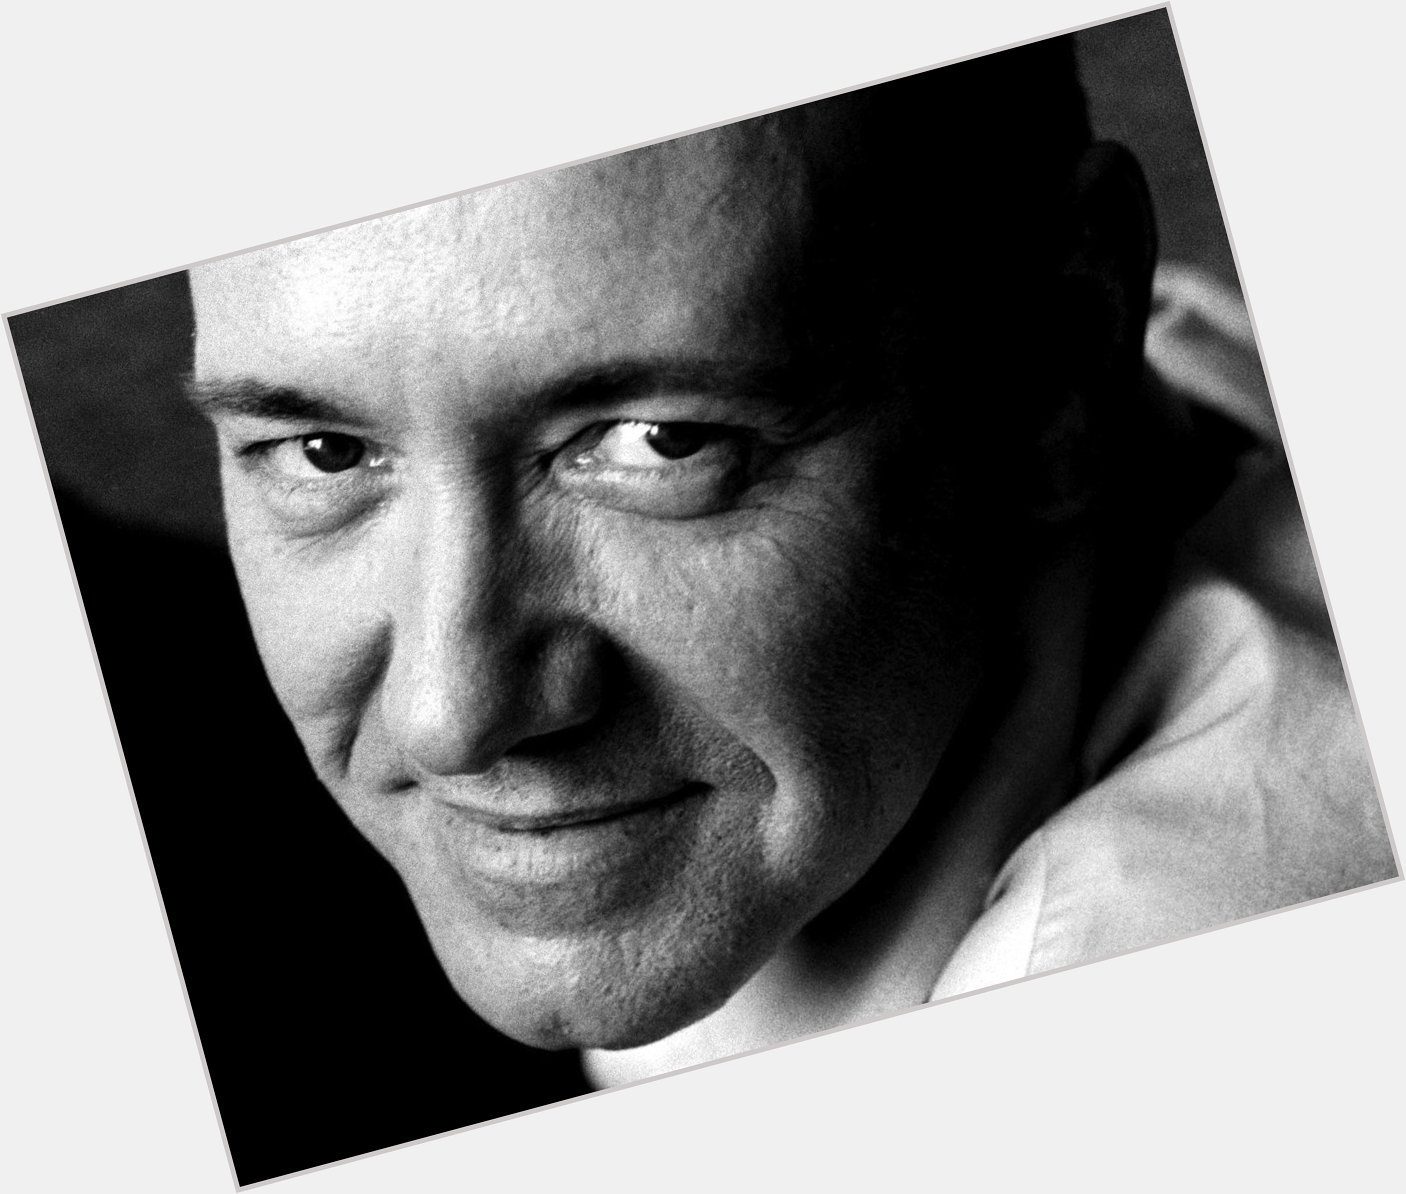 Happy Birthday, Kevin Spacey! Born 26 July 1959 in South Orange, New Jersey 